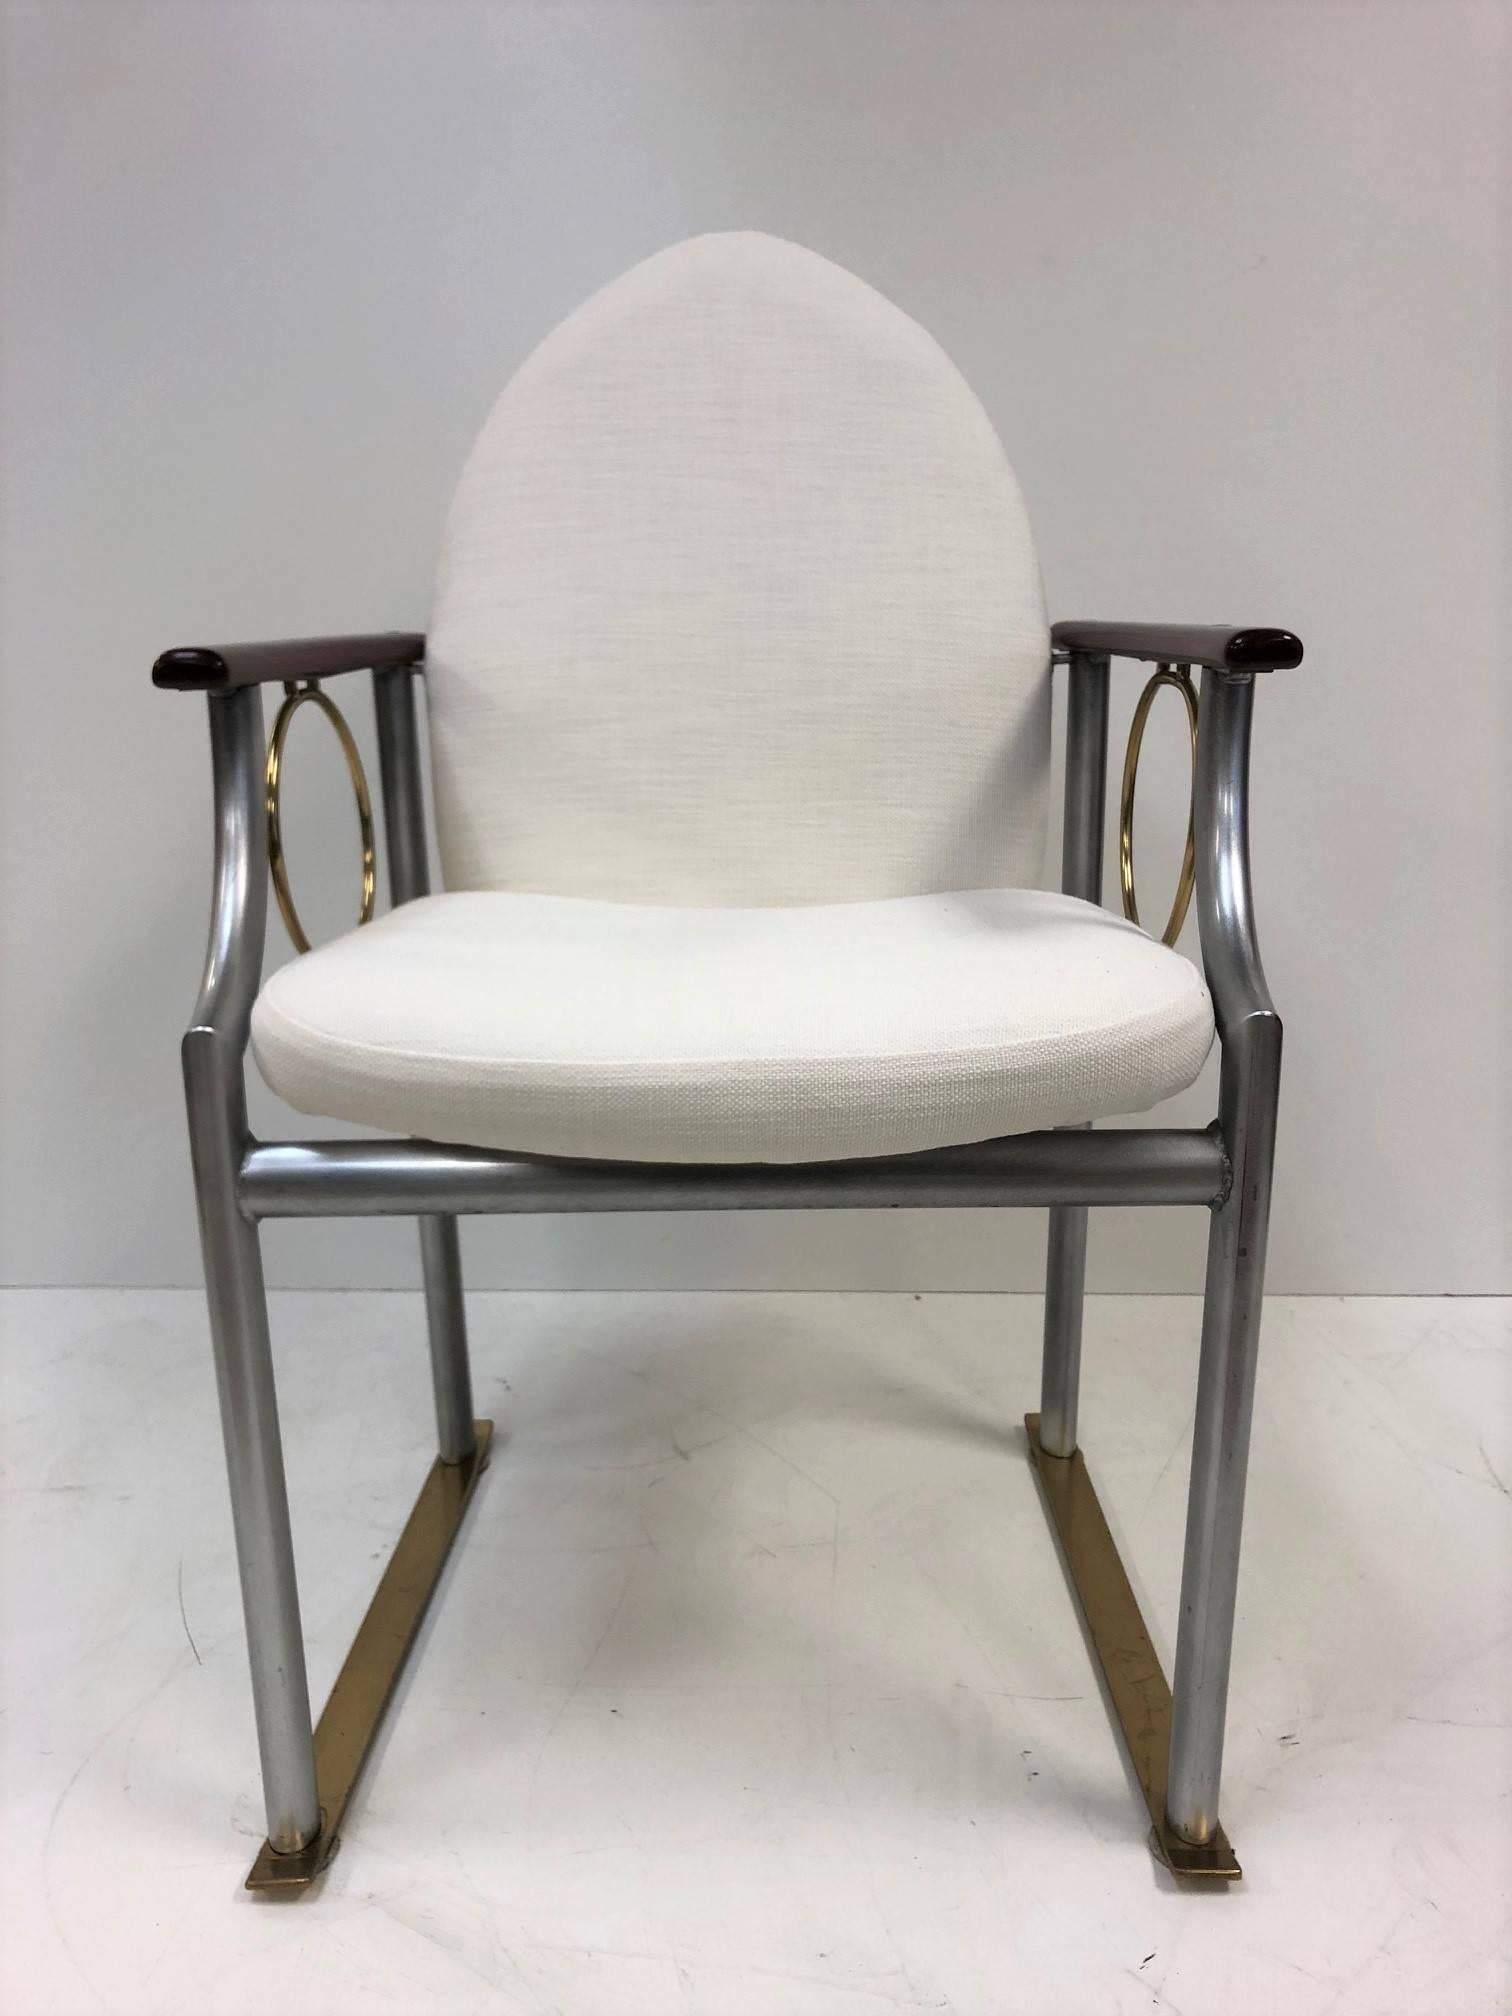 Pair of Memphis style armchairs. Chairs are newly upholstered in linen. Has mahogany arms, a painted steel frame with circular bronze trim and bronze base.